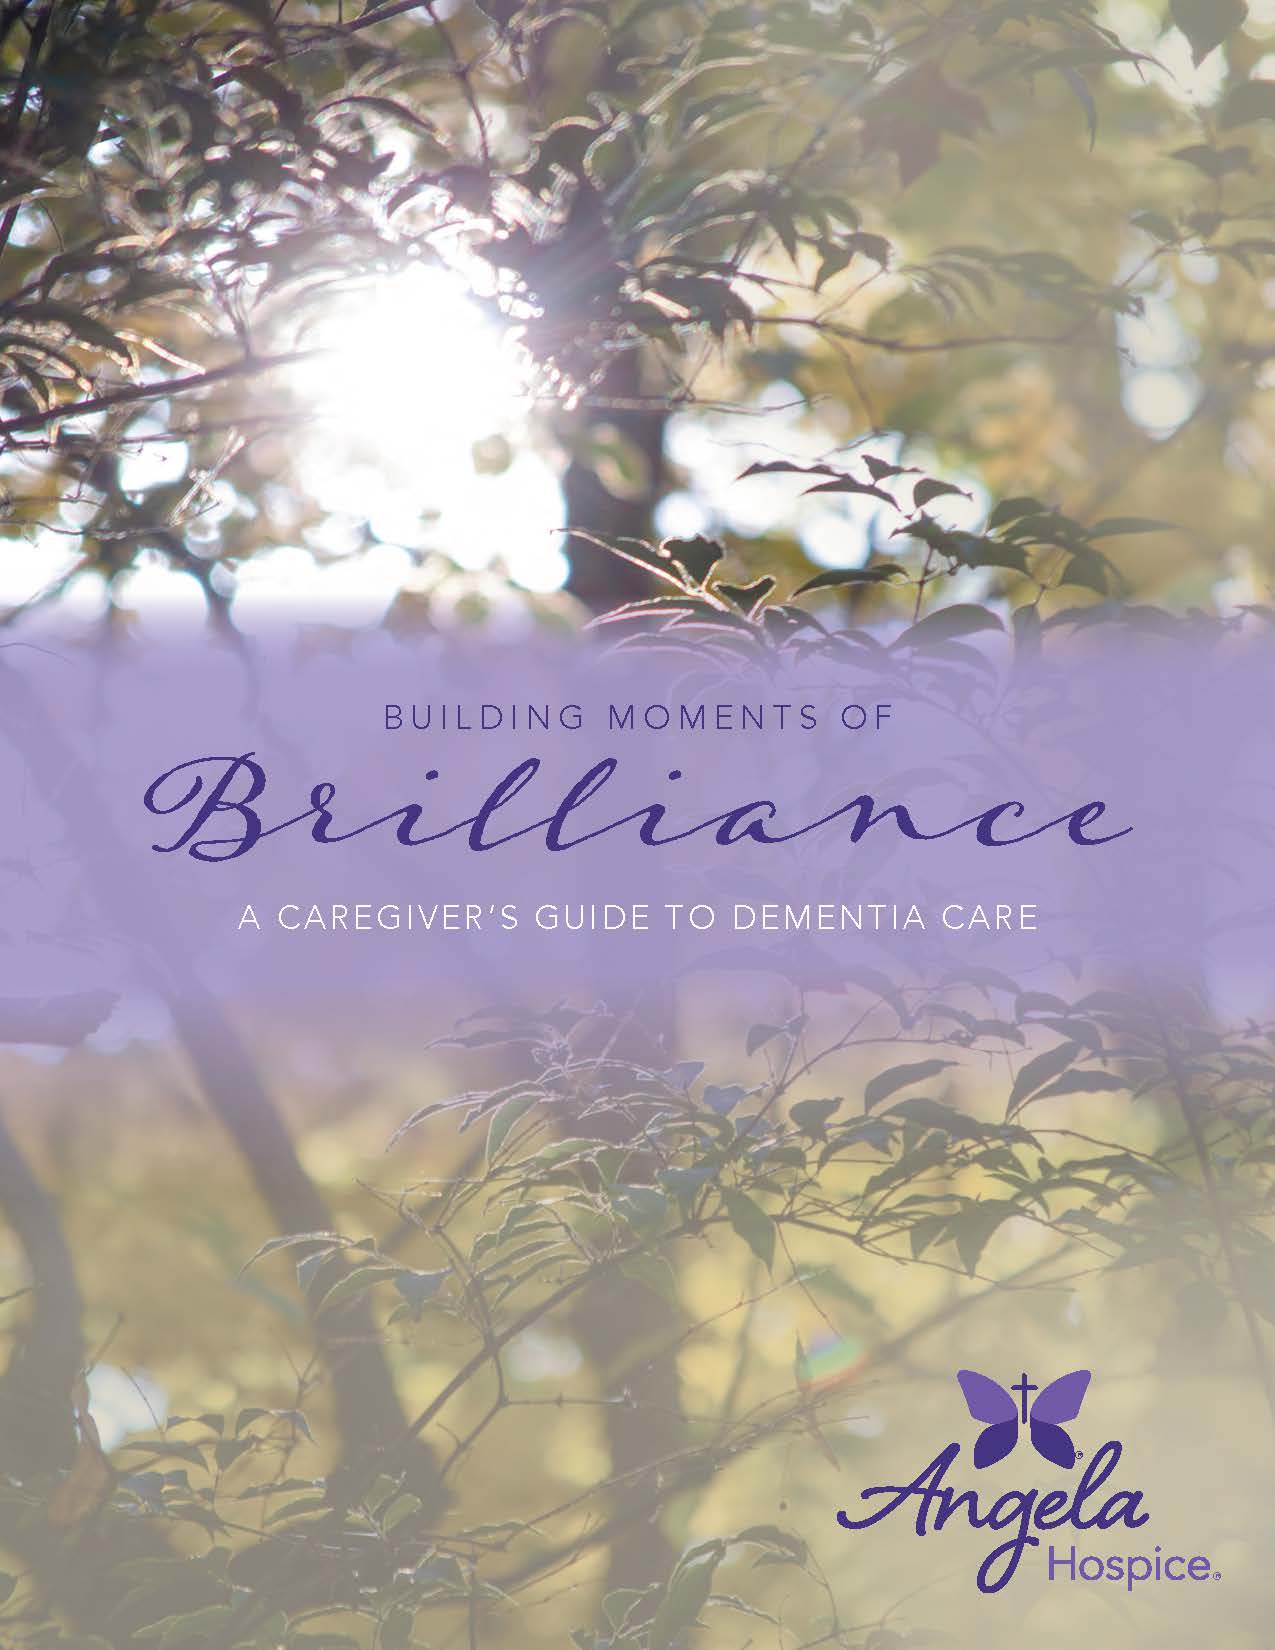 Cover image of Building Moments of Brilliance: A Caregiver's Guide to Dementia Care featuring sun shining through the leaves of a tree